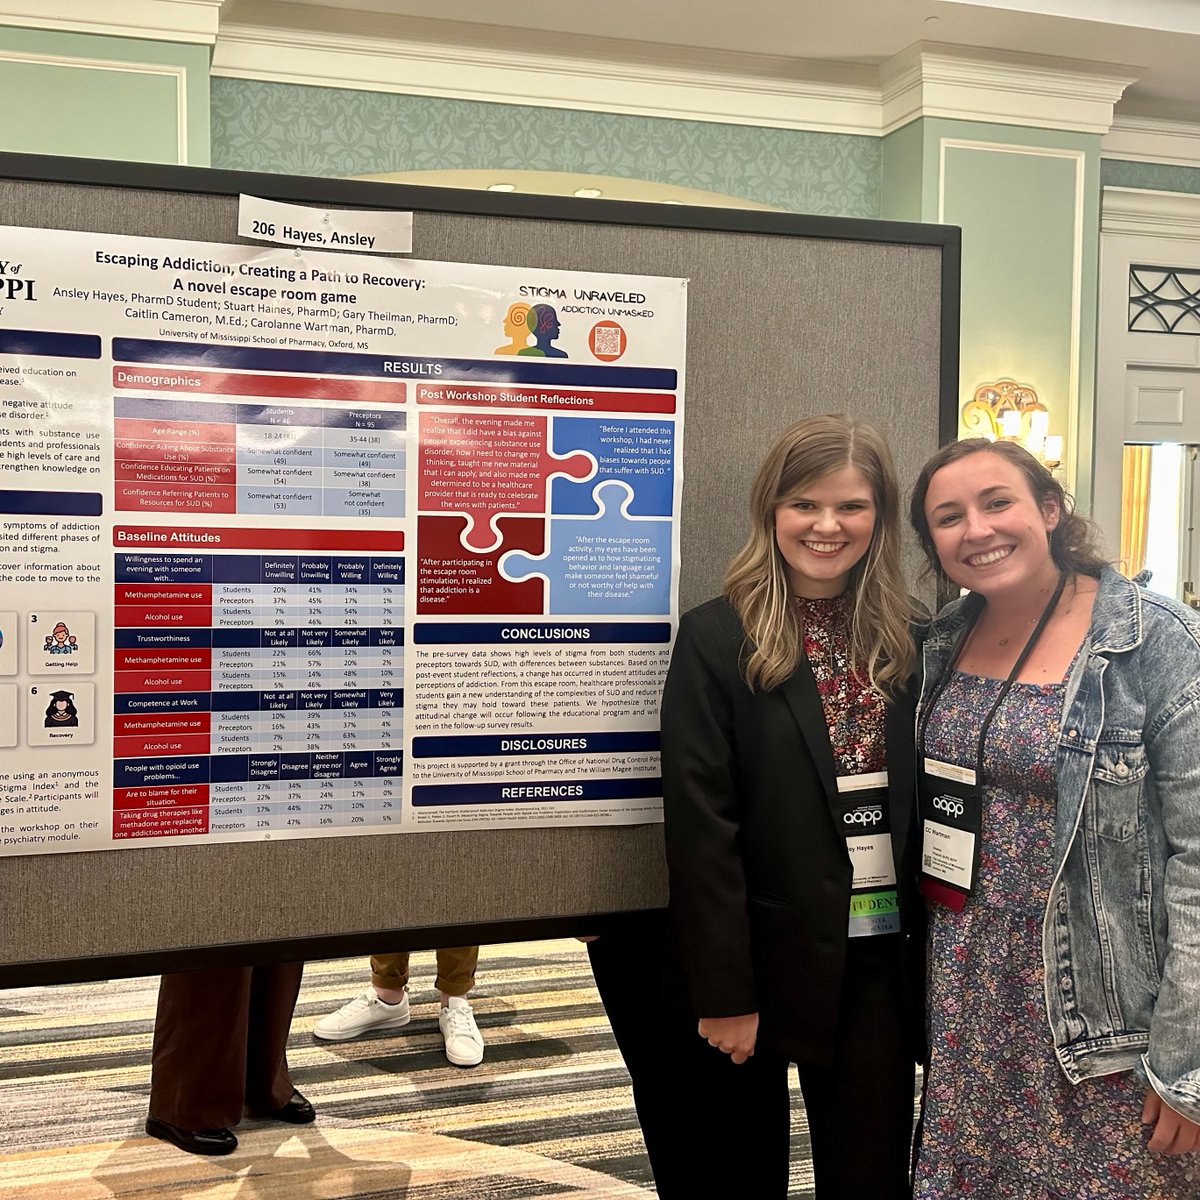 Ansley Hayes presented her poster at the American Association of Psychiatric Pharmacists Annual Meeting in Orlando last week. We are so proud of you, Ansley!